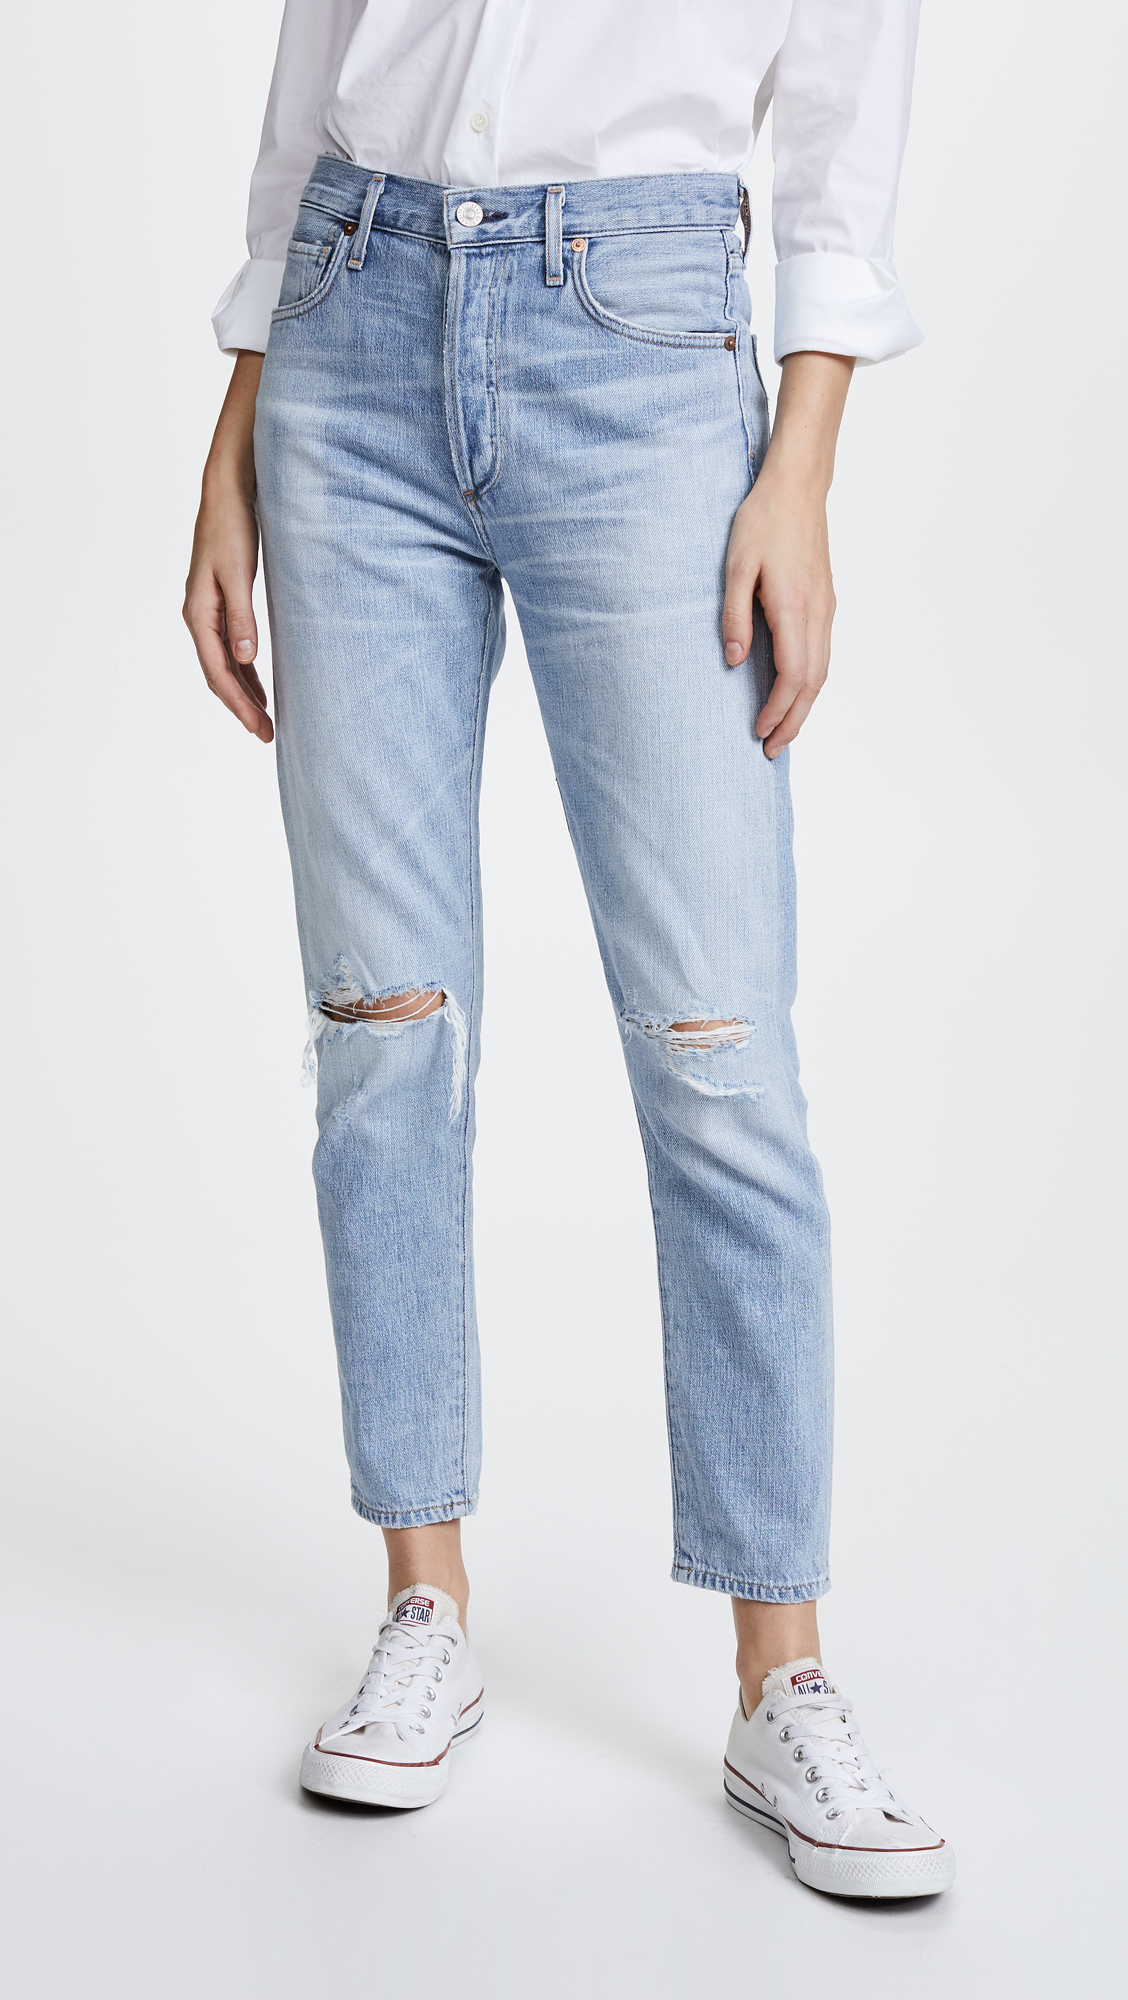 High-Rise Distressed Jeans Ankle Crop Women's